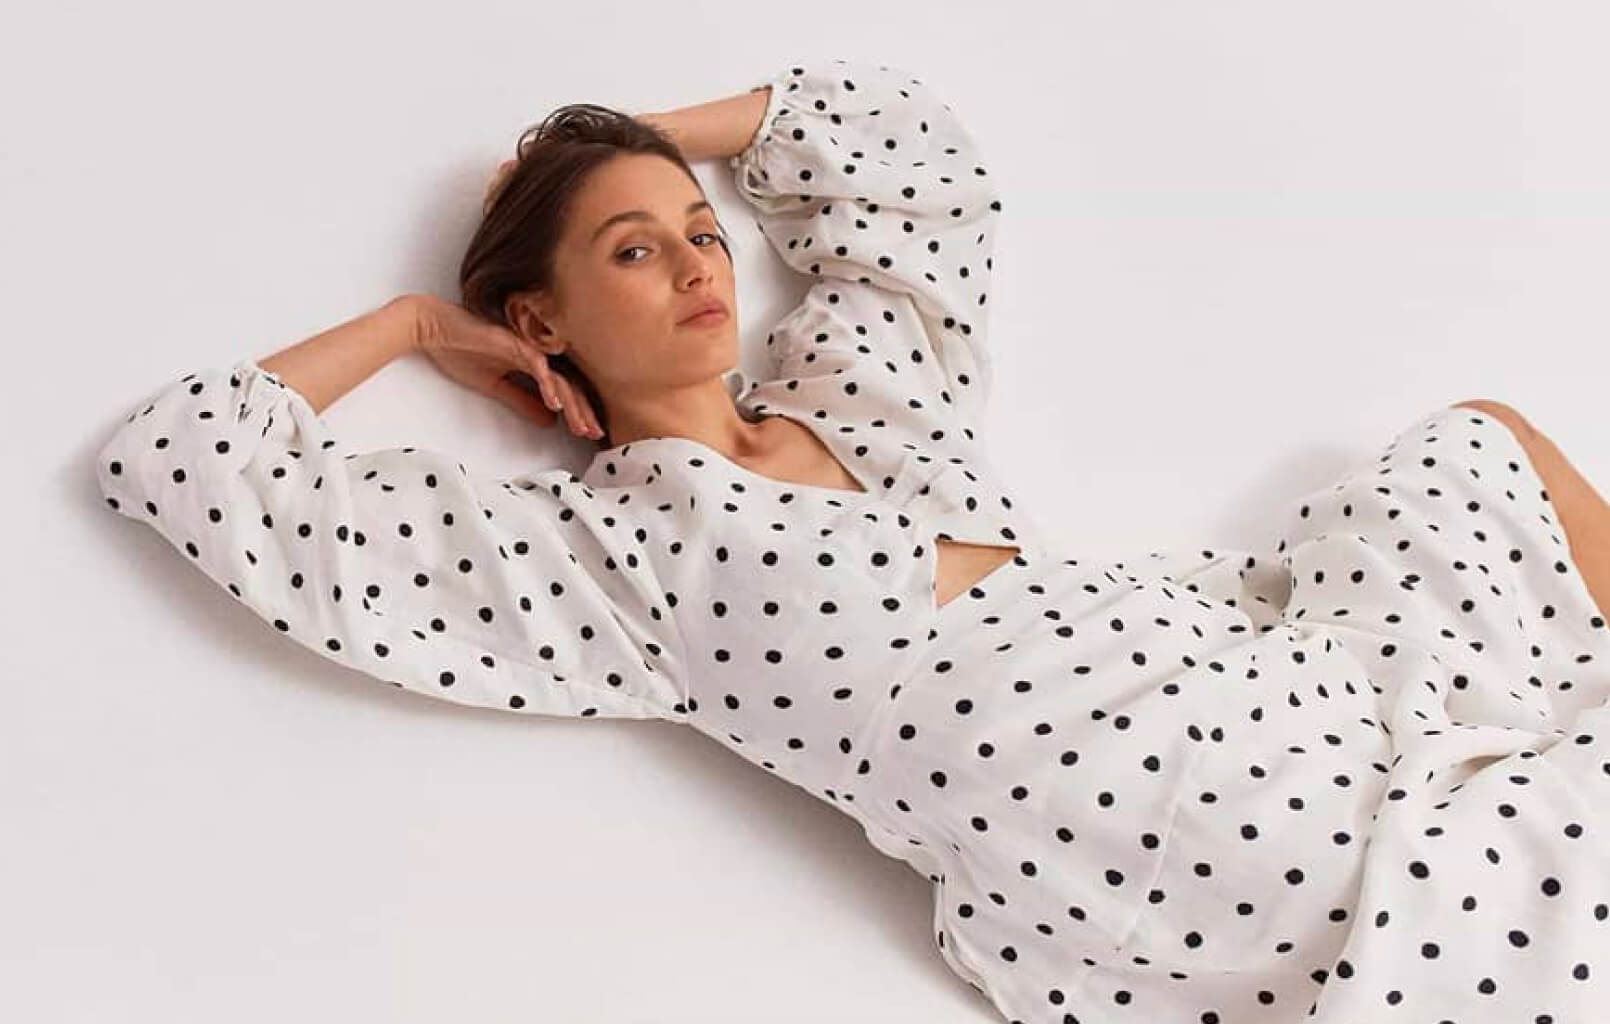 Woman laying down wearing polka dotted dress